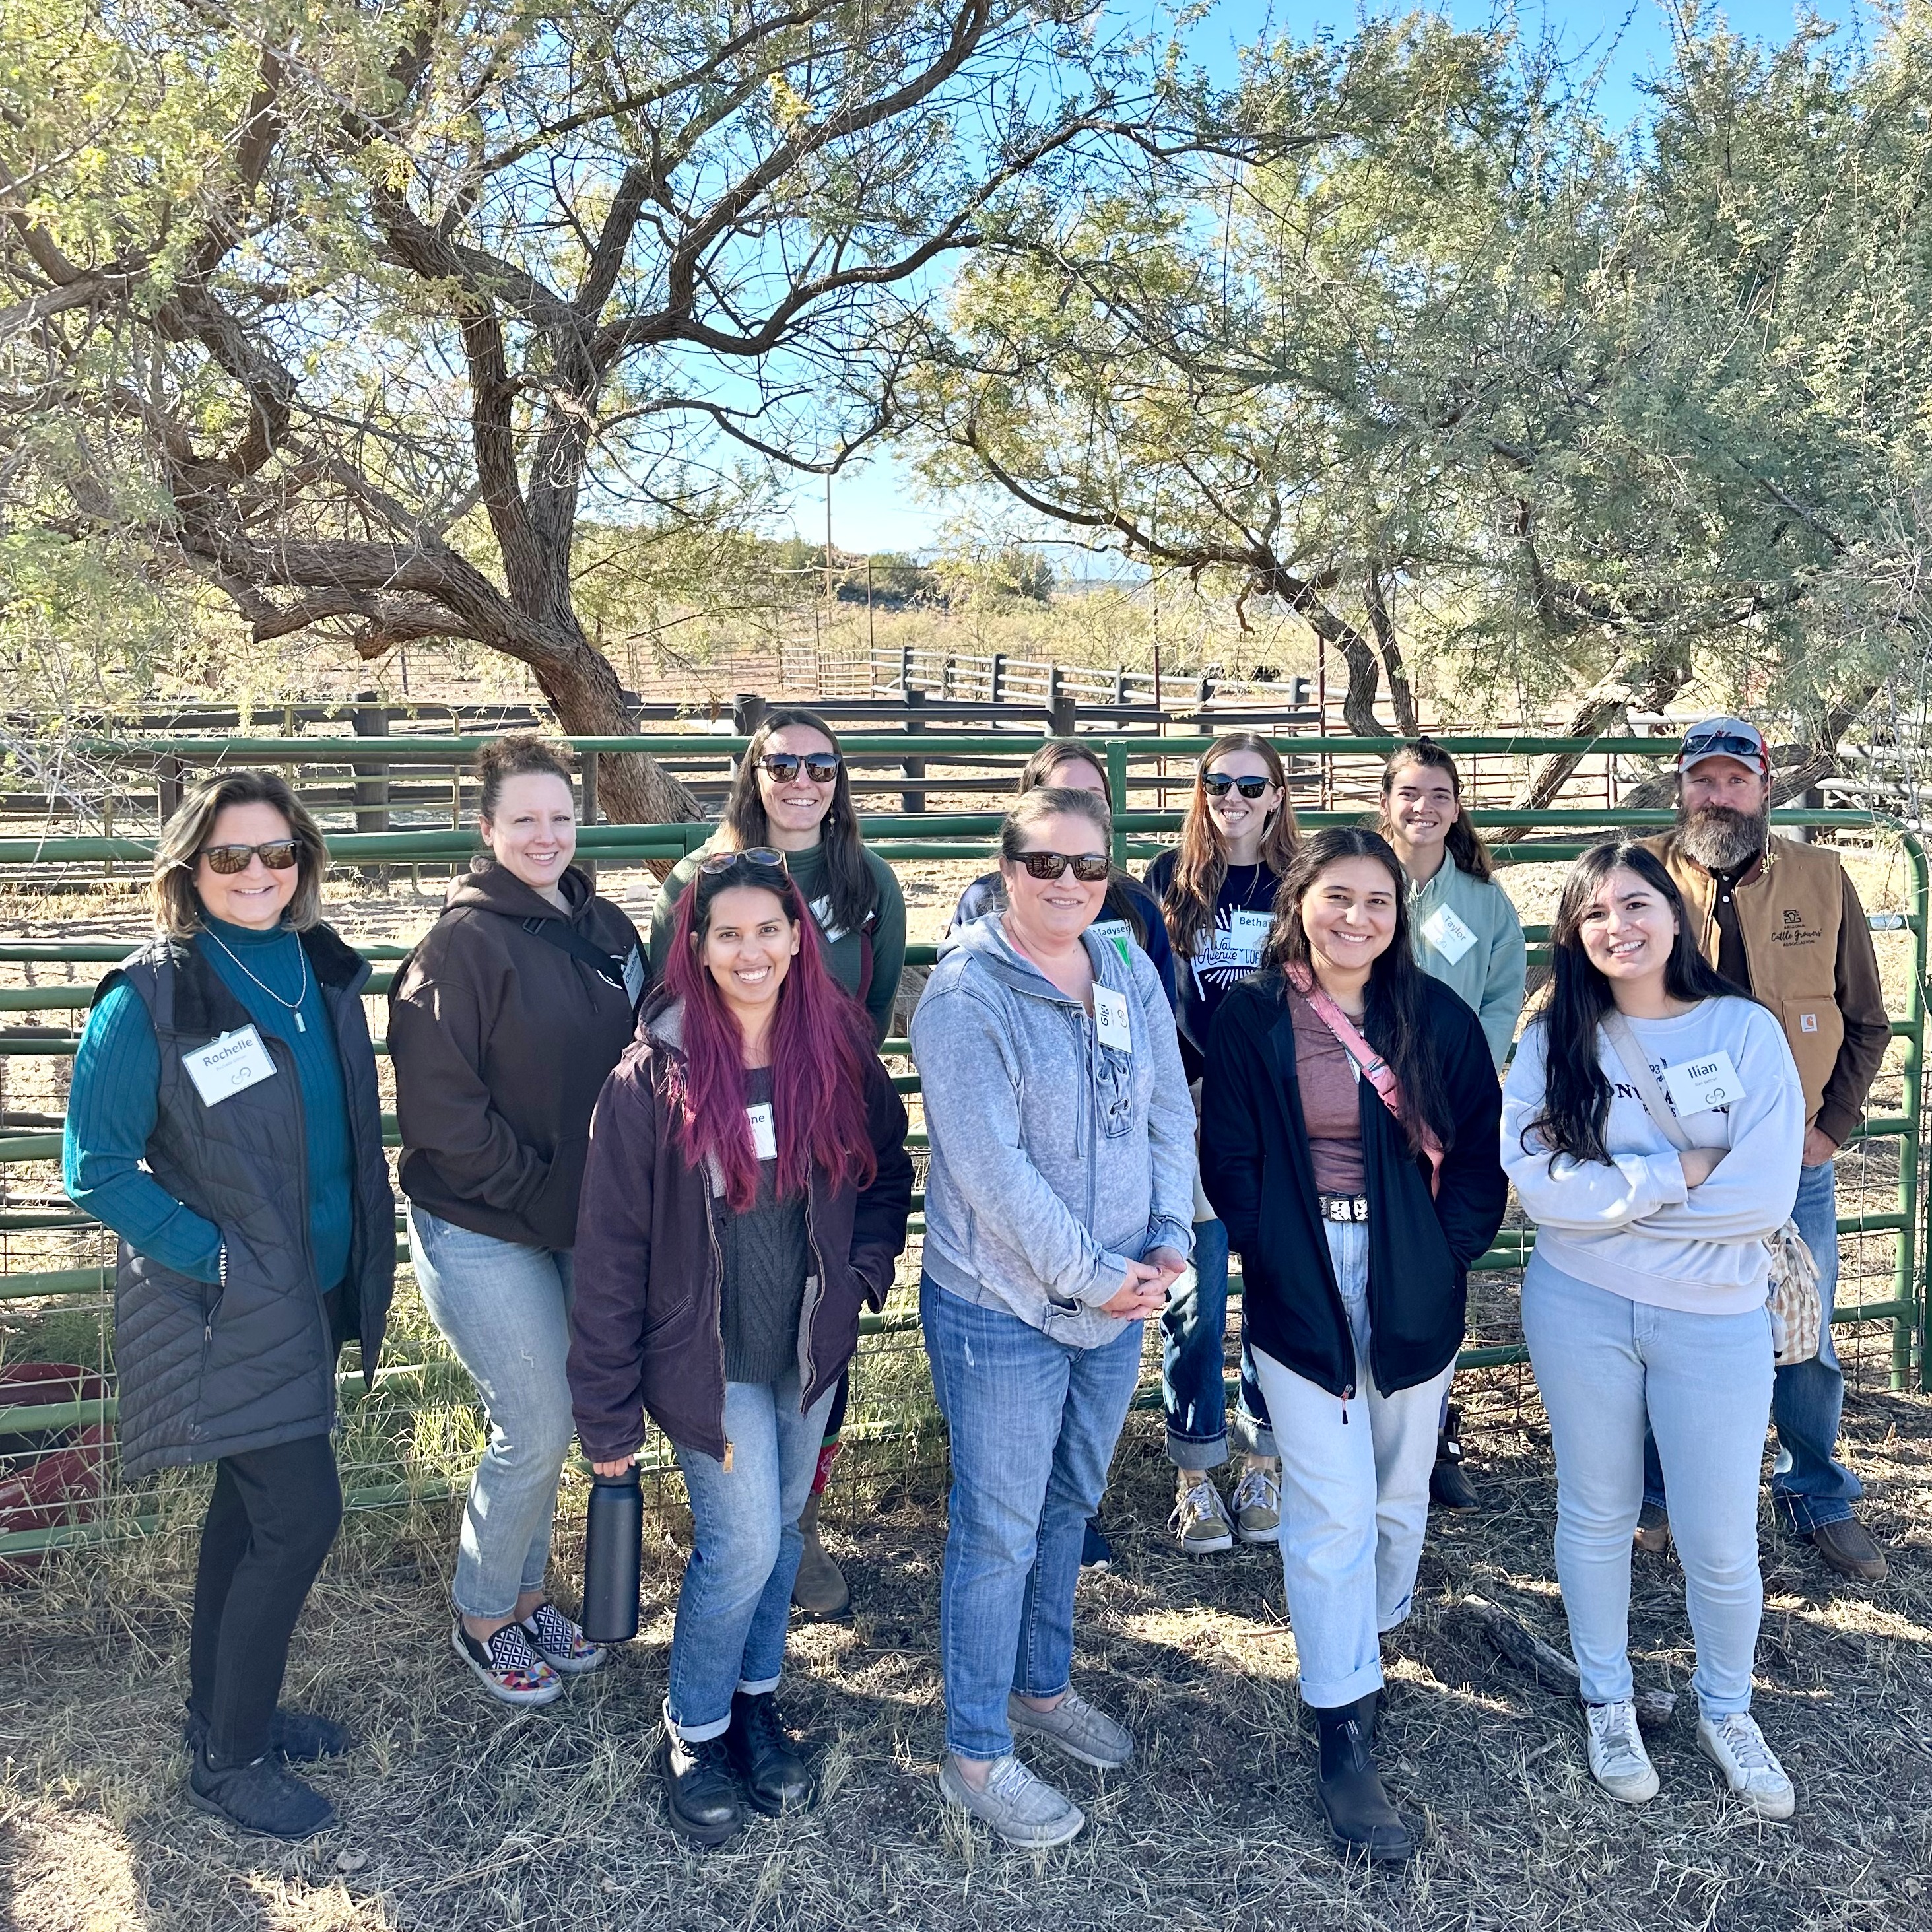 Nutrition, Beef, and Pine Trees: Northern Arizona University Students Tour Arizona Cattle Ranch and Learn About Nutrition and Beef